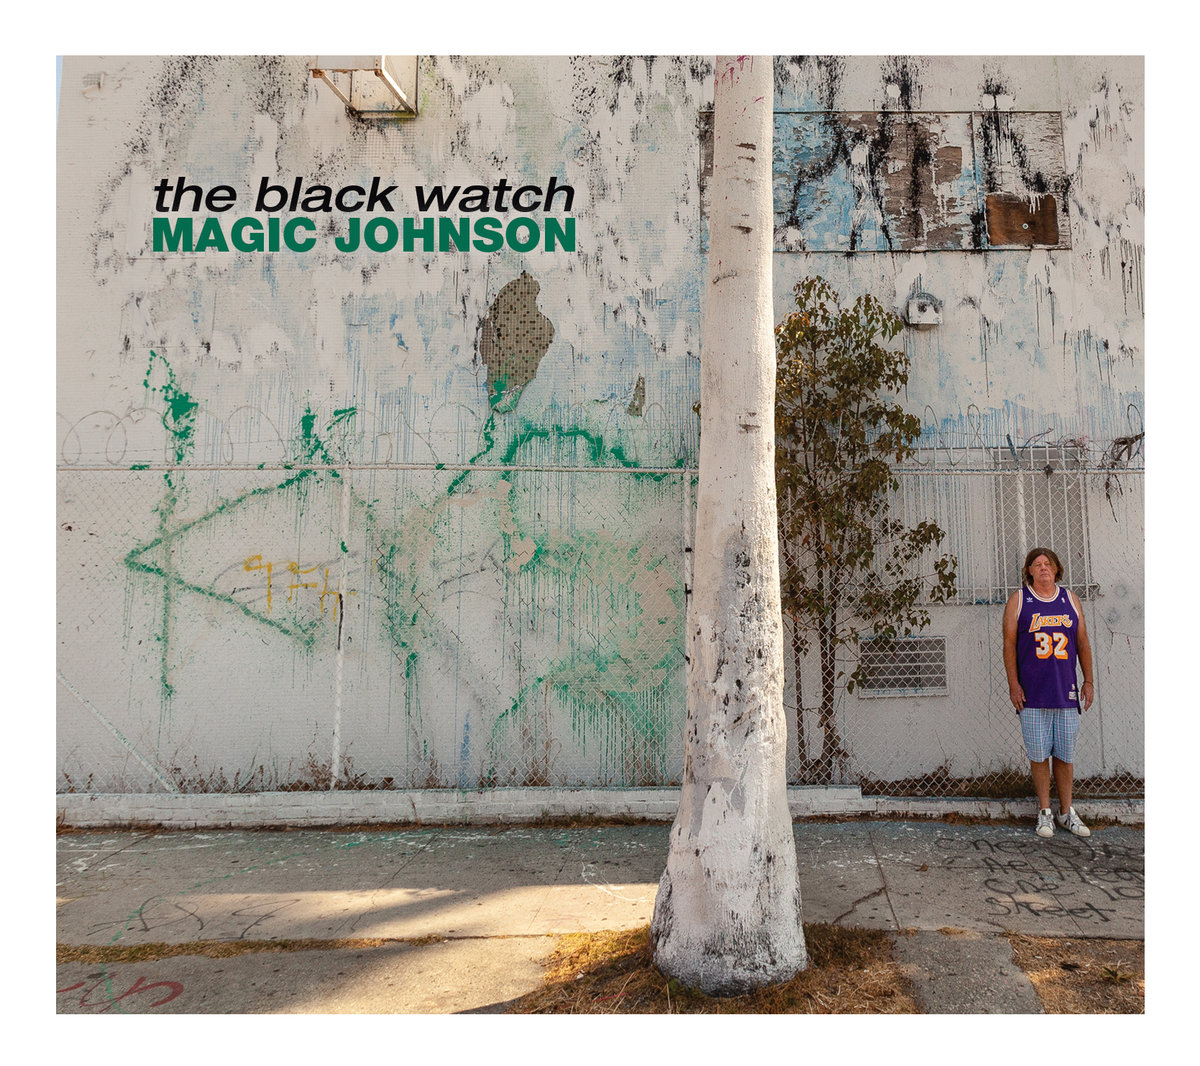 NEWS: the black watch to release their 17th album in August